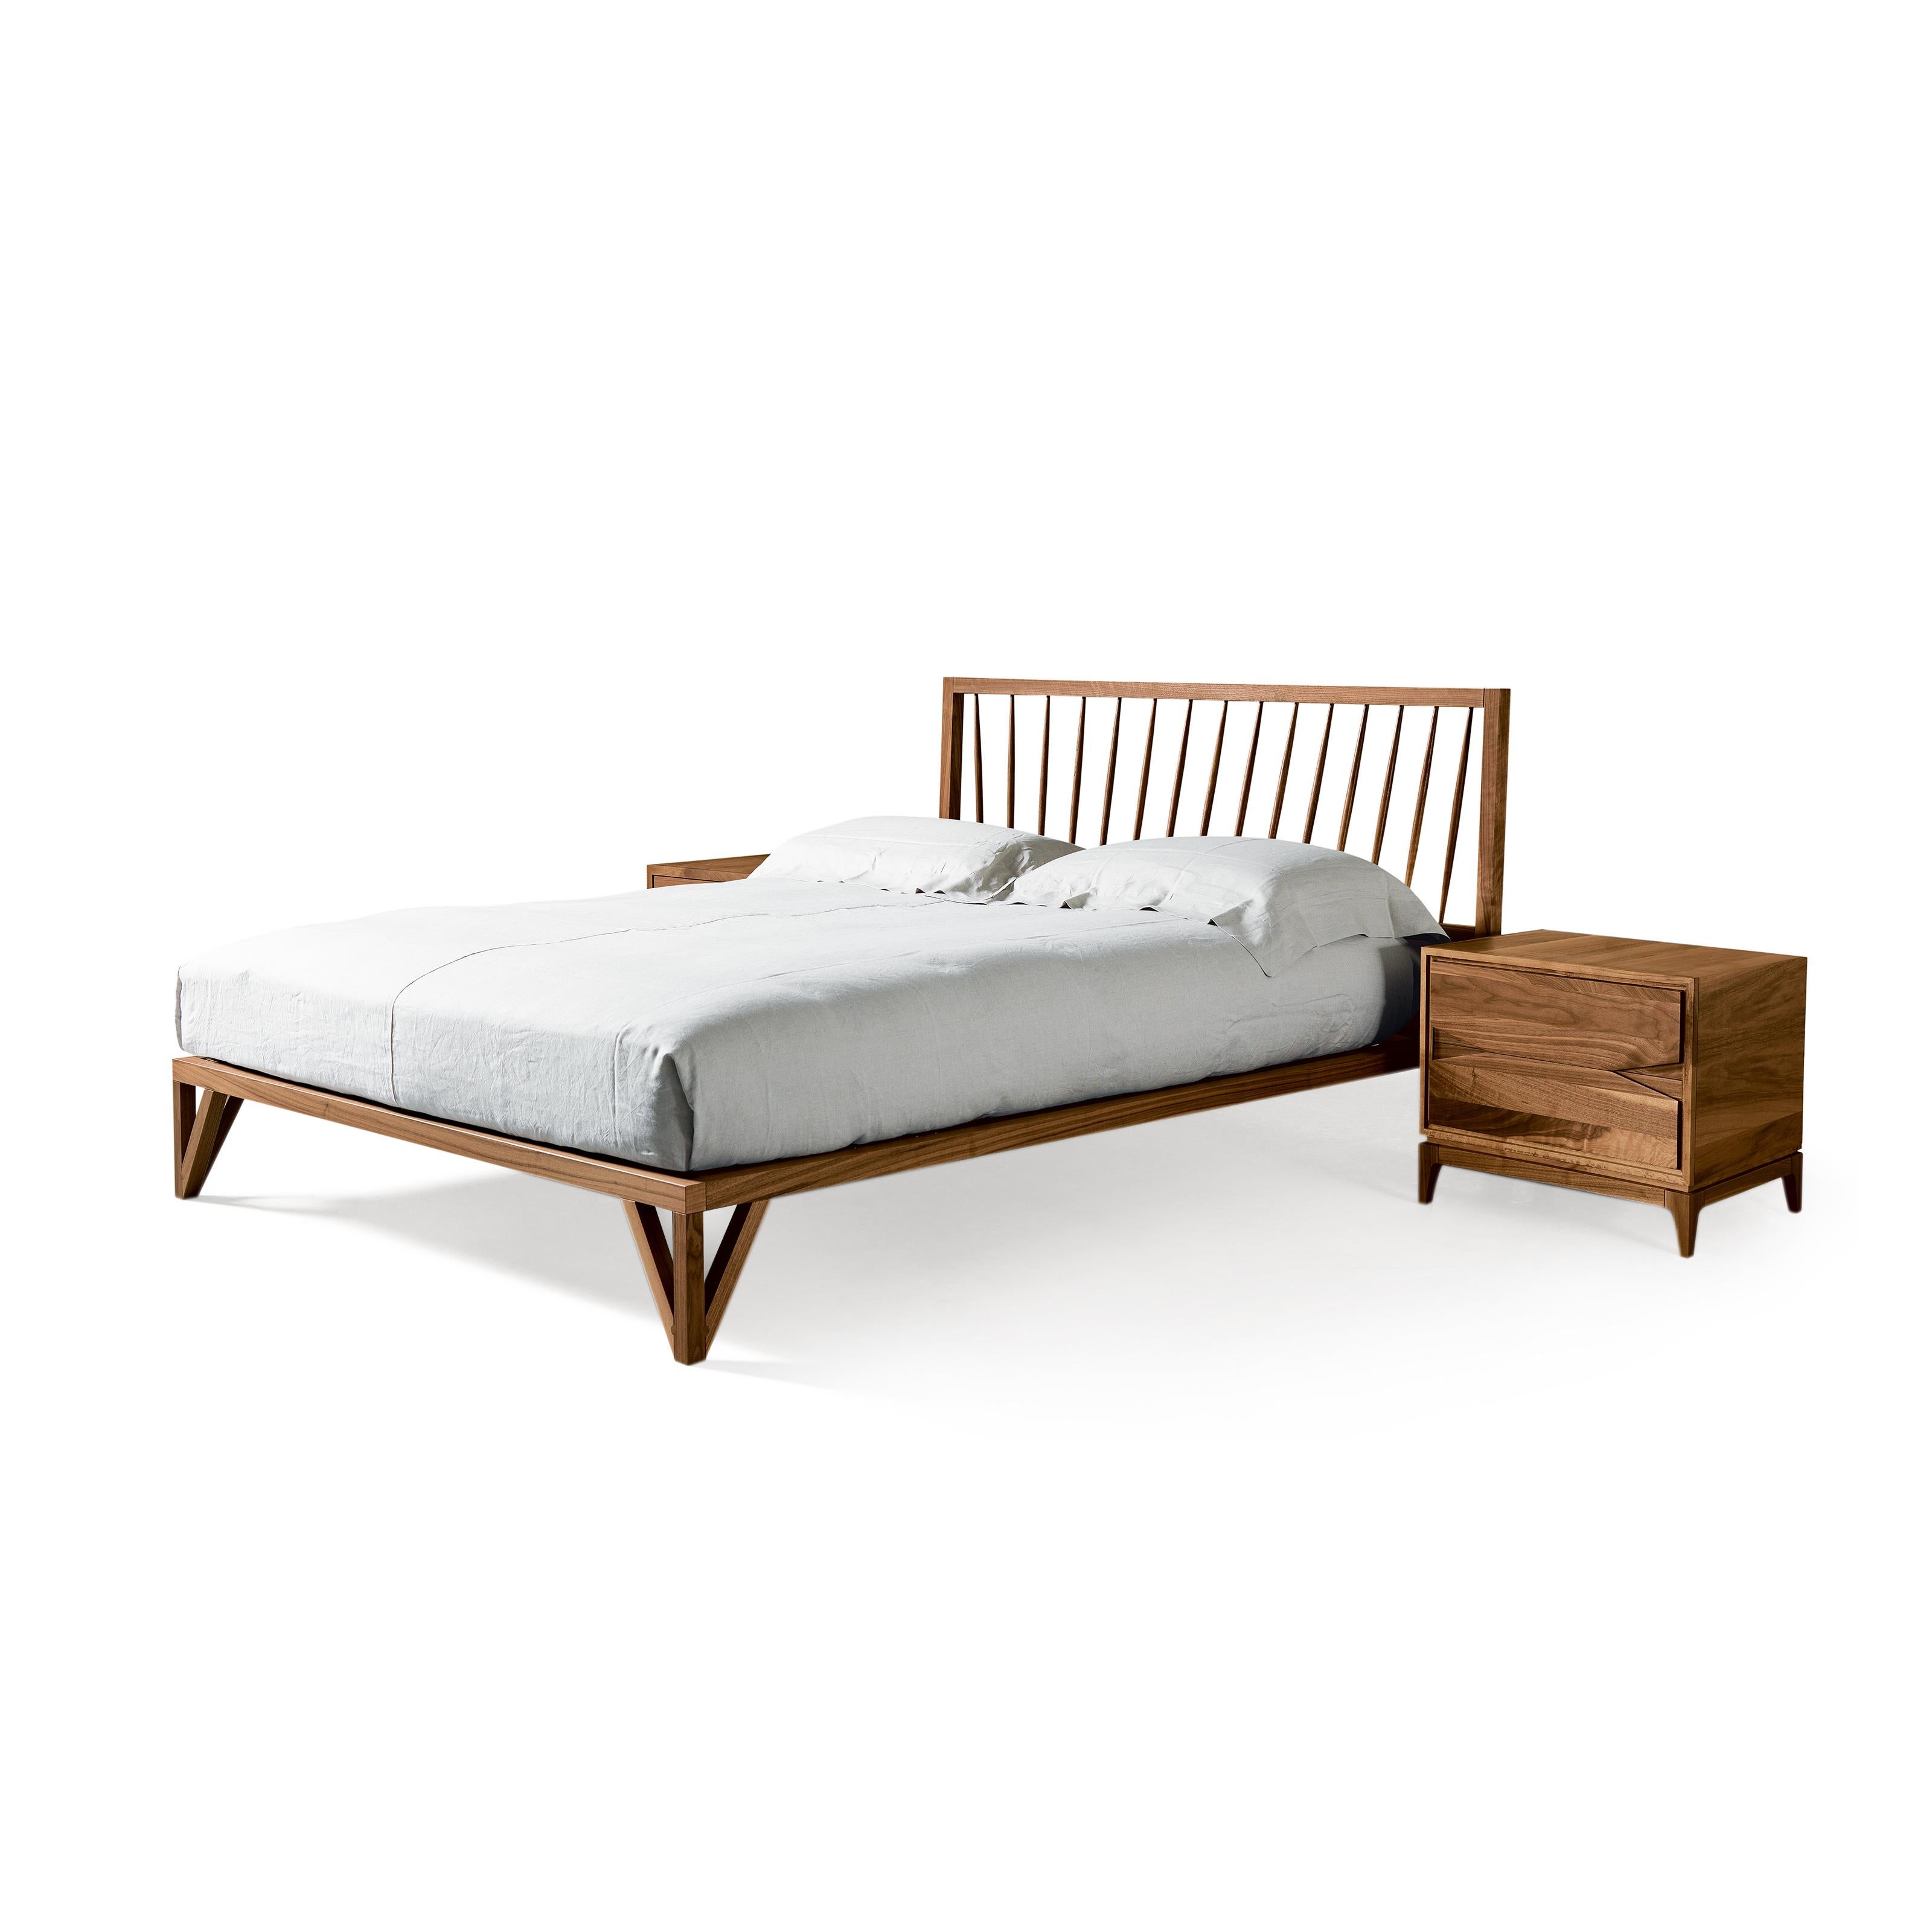 Leggiadro solid wood bed, well proportioned, simple and sophisticated, is characterized by a structure in canaletto walnut. A timeless piece that combines contemporary design and high quality Made in Italy craftsmanship. A minimalist style, with